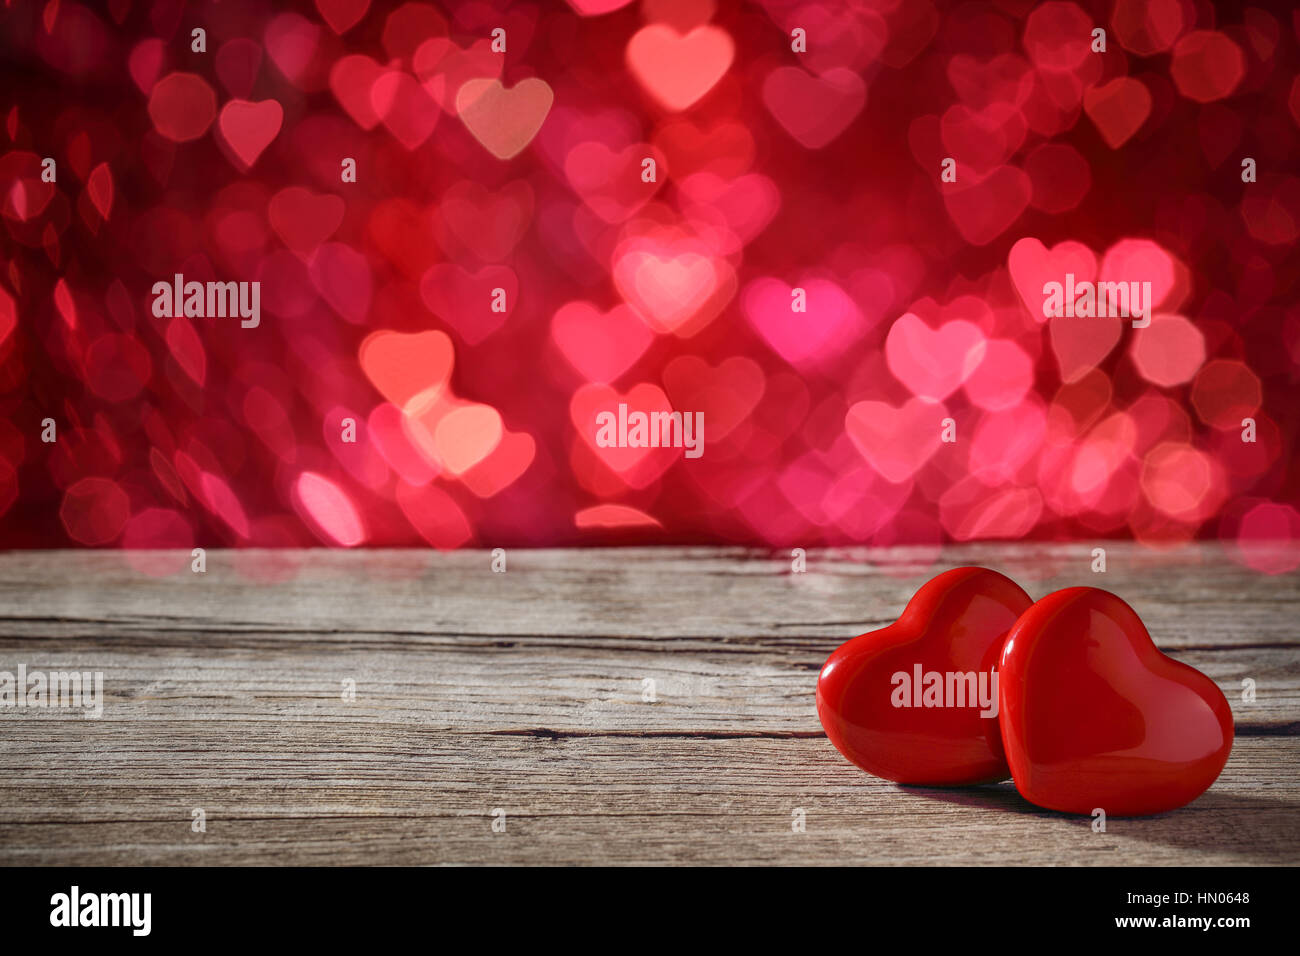 Heart on abstract background. Valentine's Day background Stock Photo